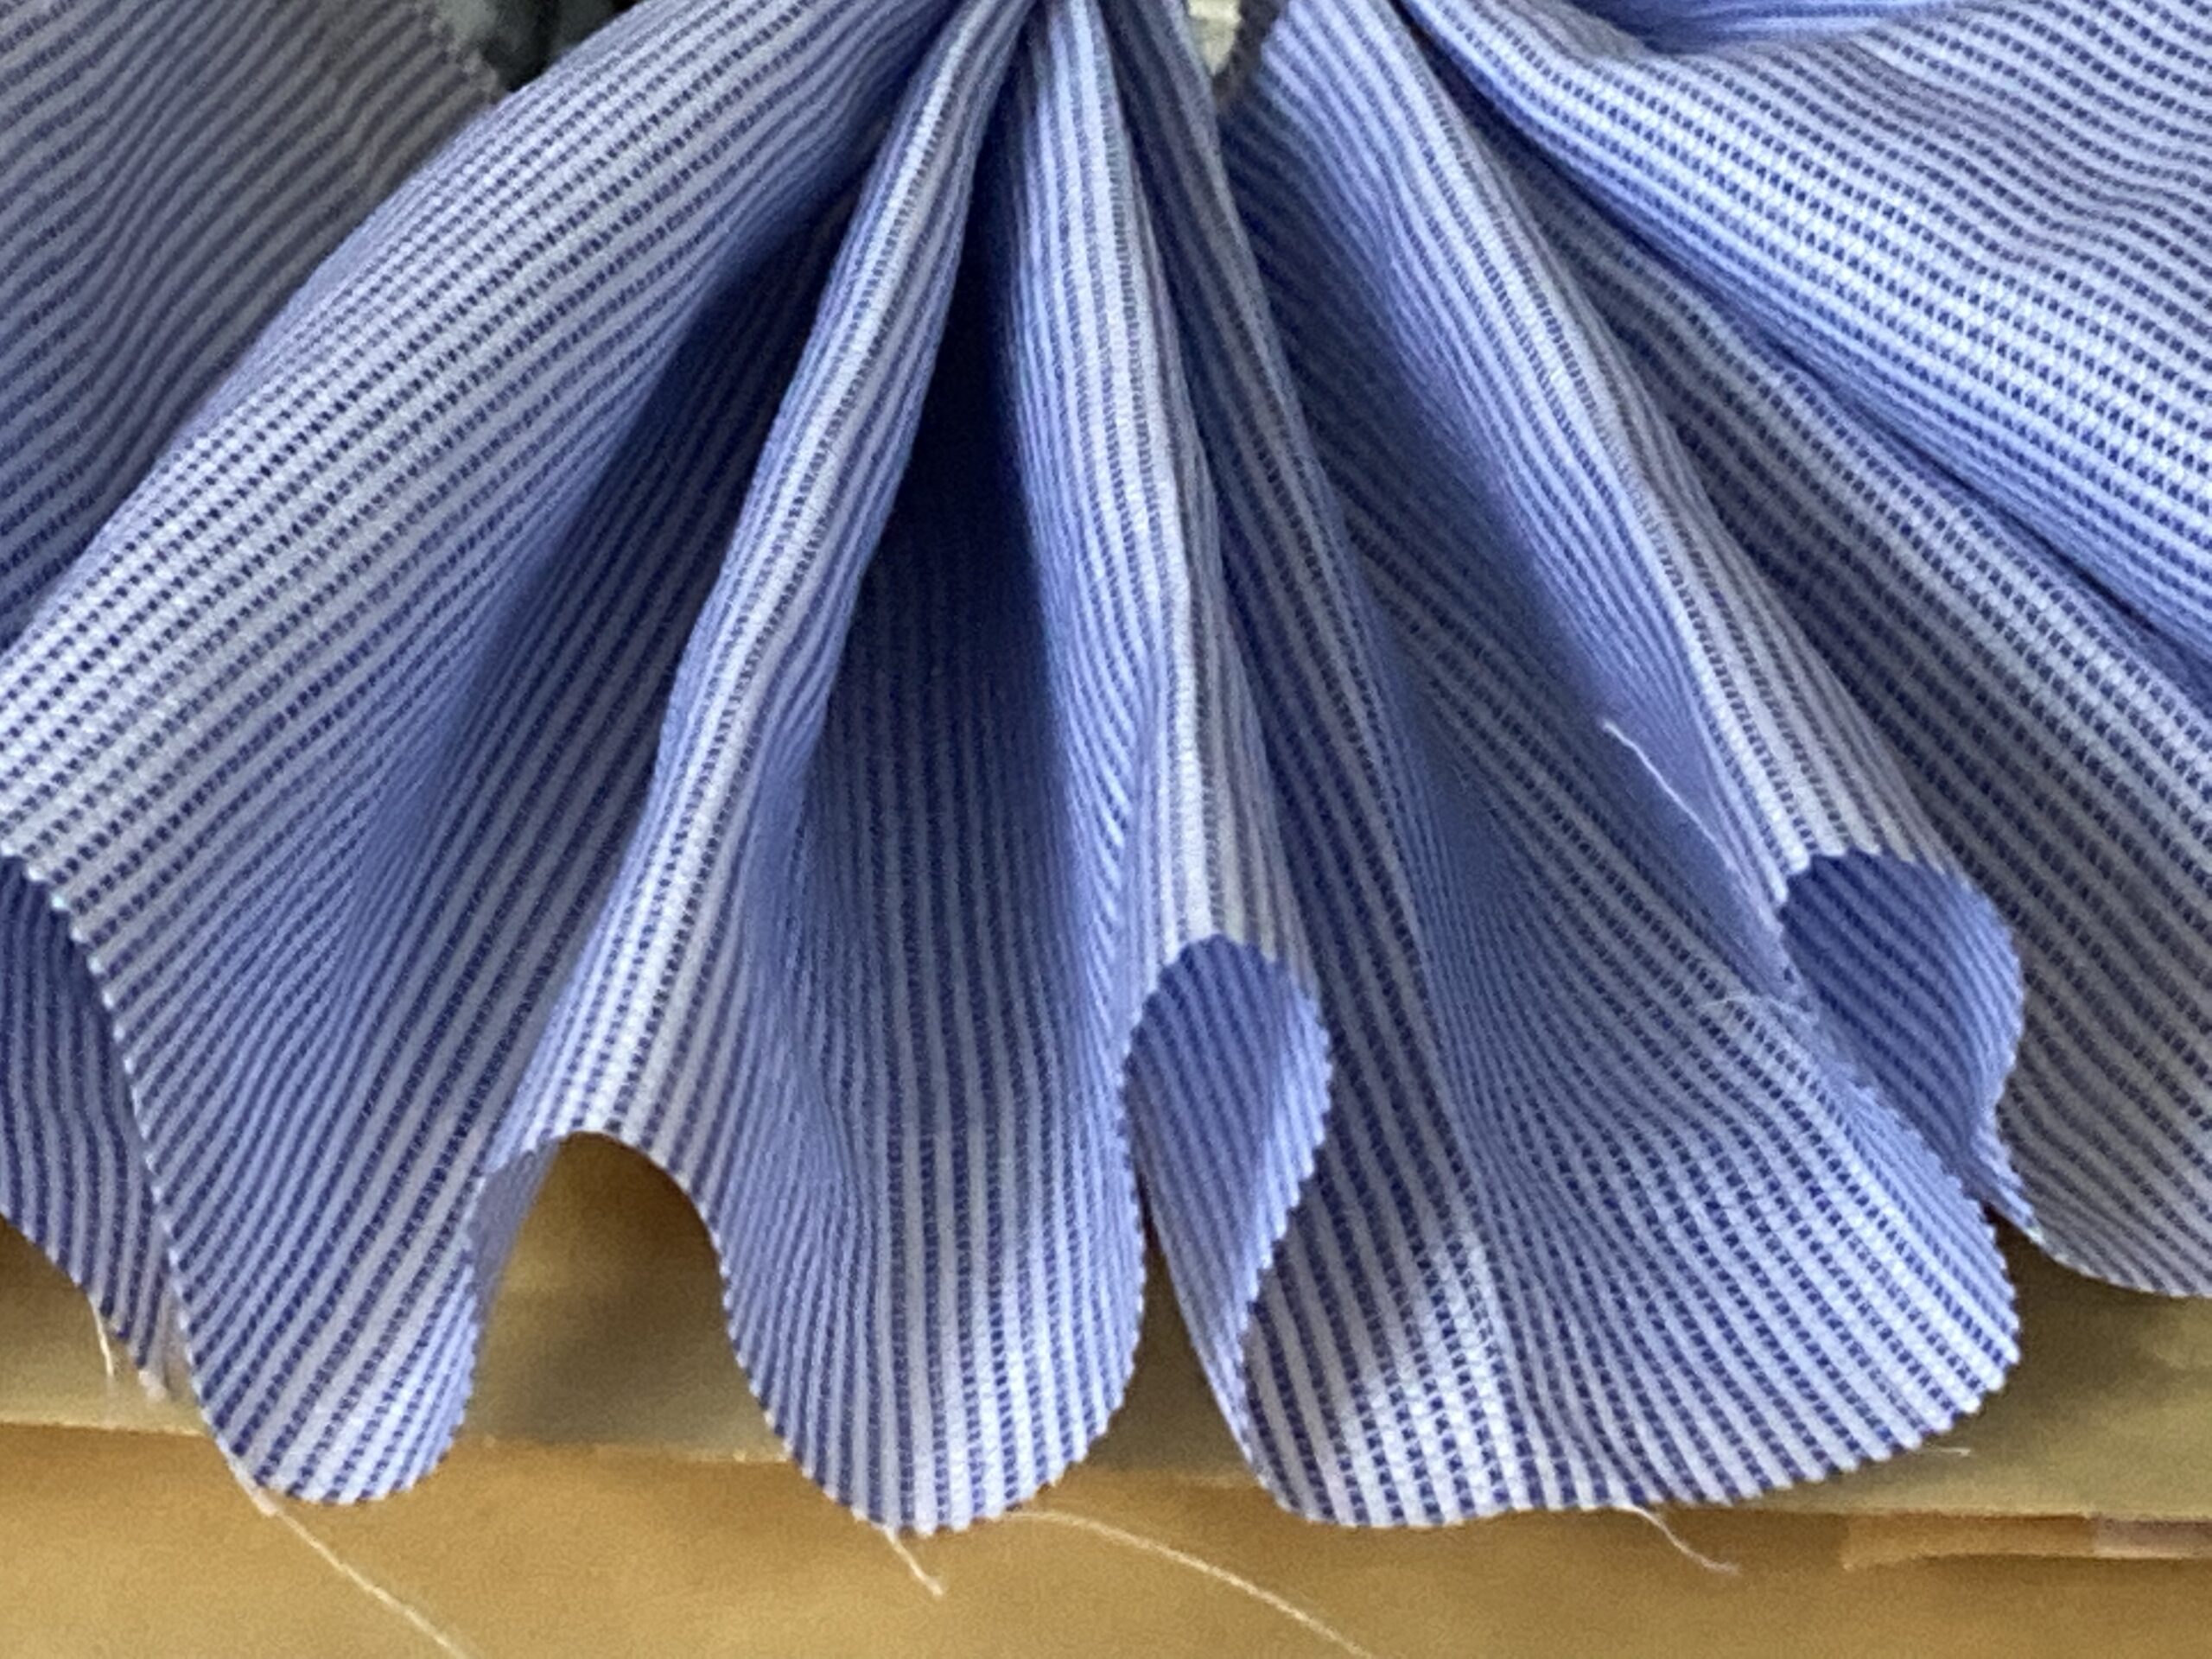 Image show a gathered piece of shirt material from remenants of a shirt factory in Derry. The material is thinly striped and is light blue and white in colour.